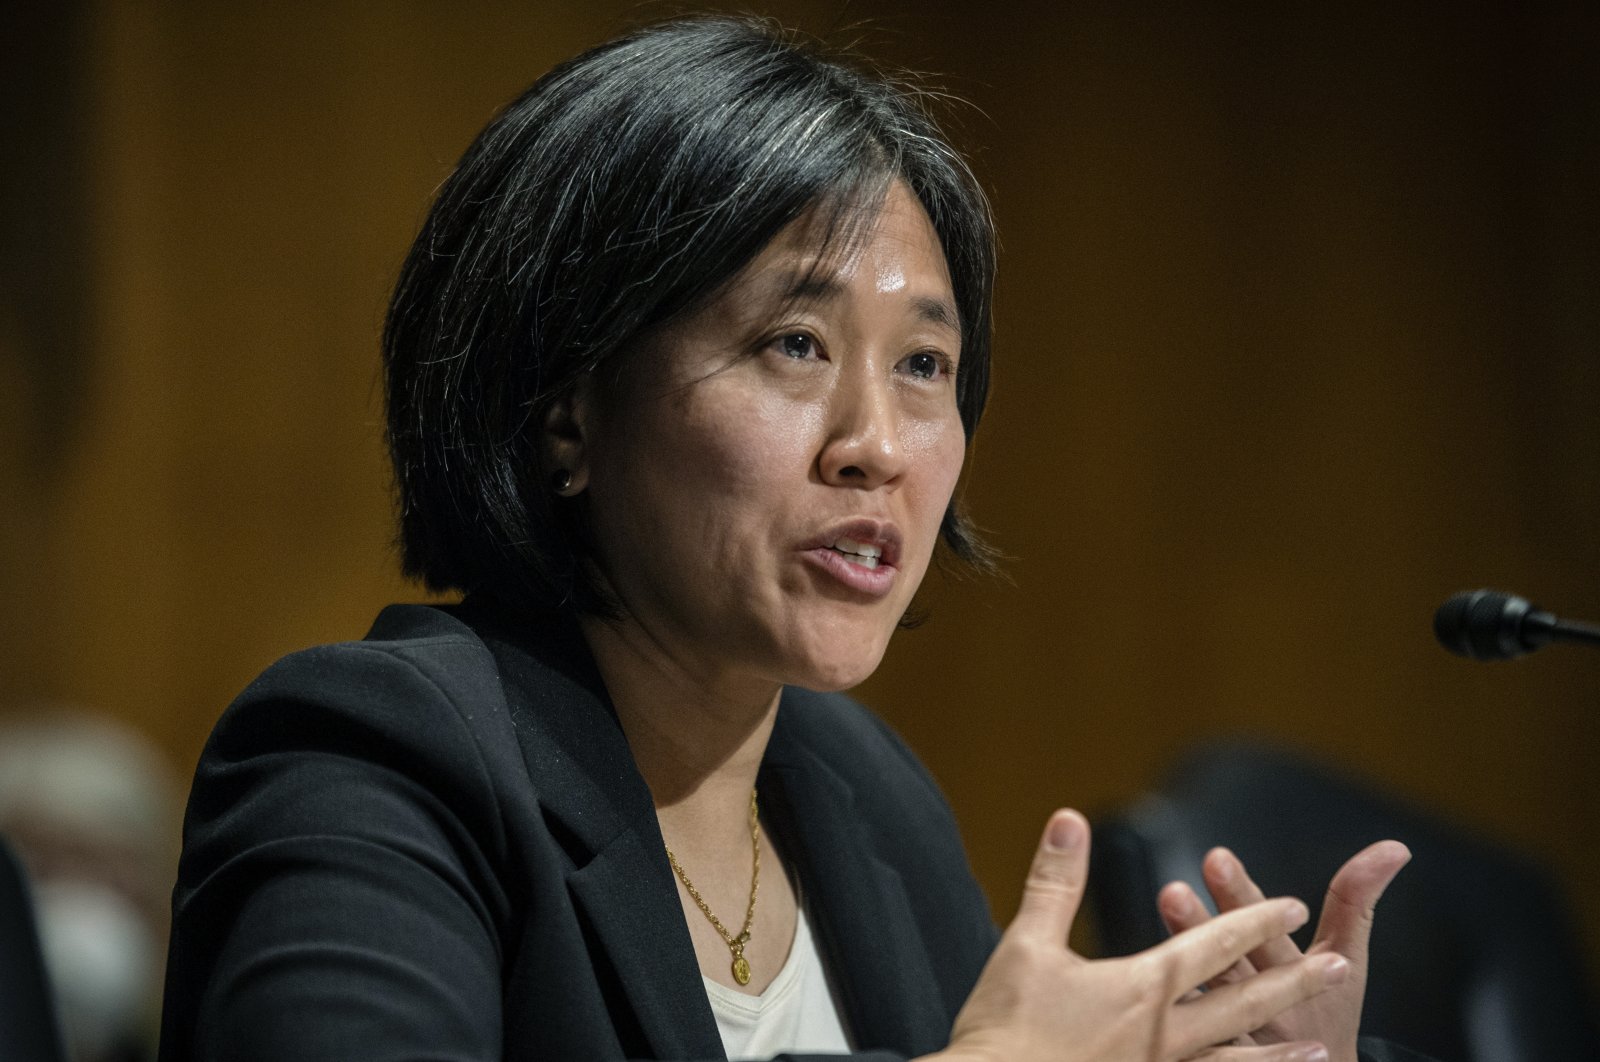 Katherine Tai, then the nominee for U.S. trade representative, speaks during a Senate Finance Committee hearing on Capitol Hill, the U.S., Feb. 25, 2021. (AP Photo)